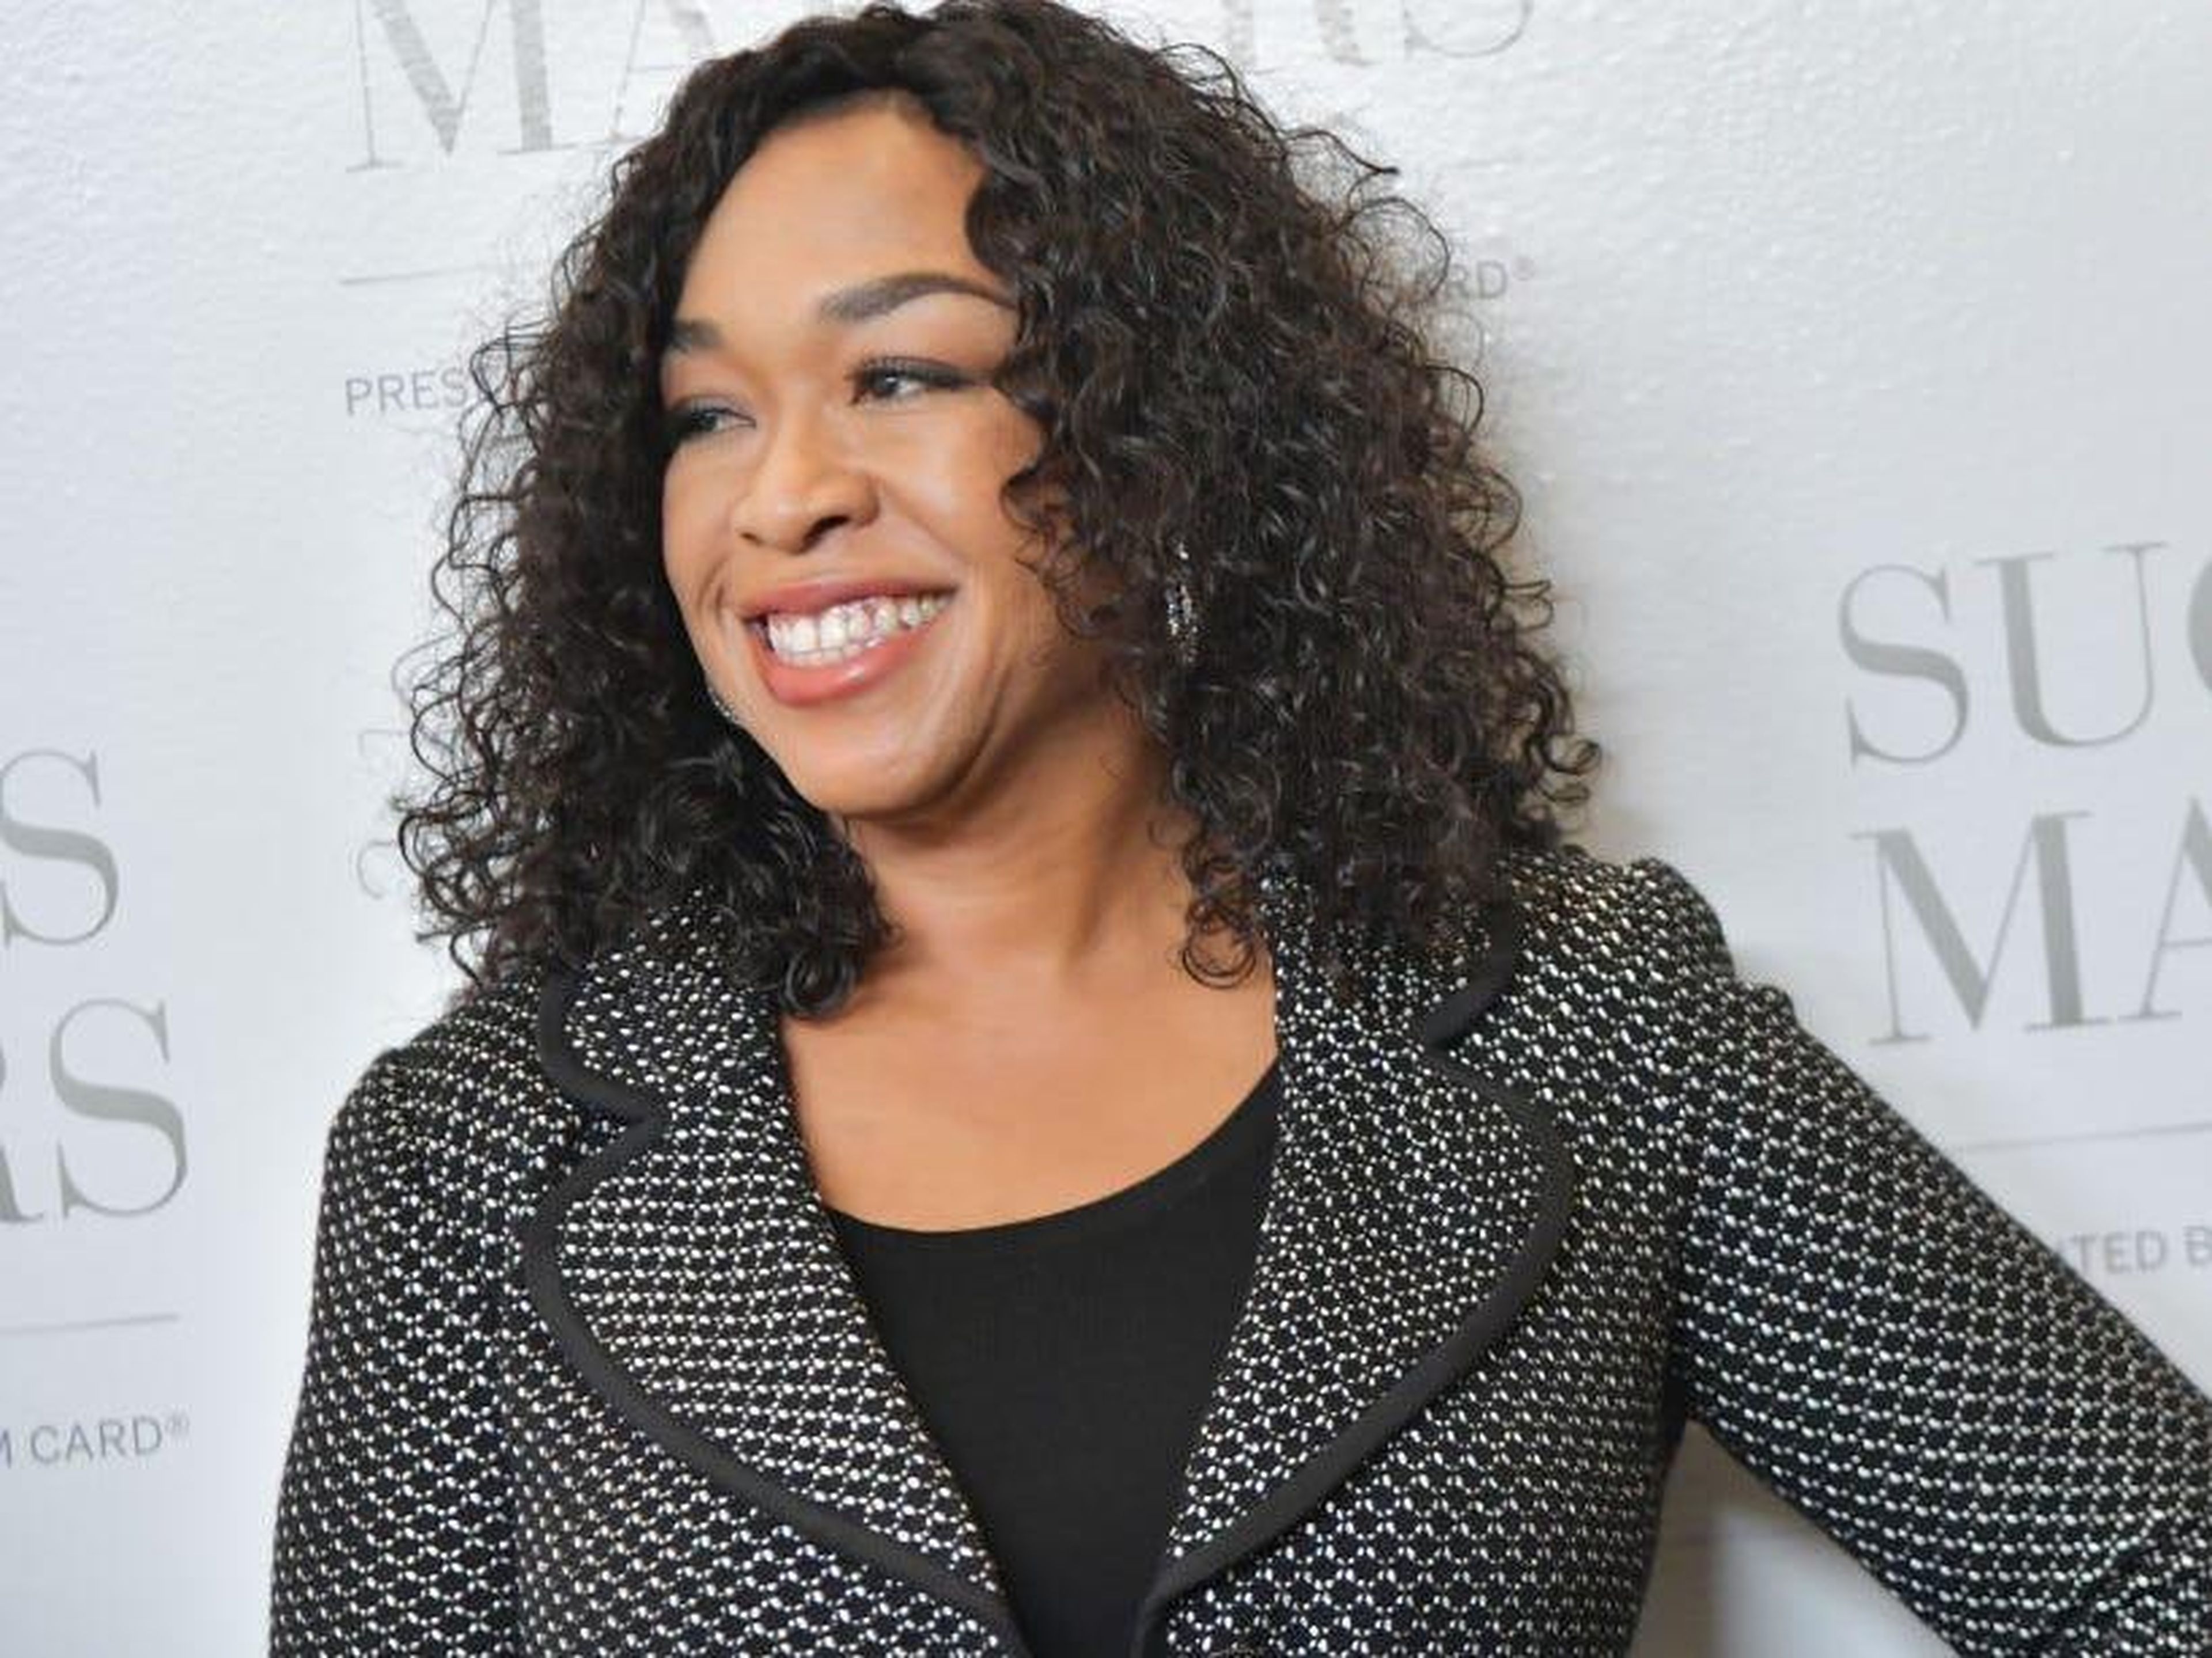 Shonda Rhimes is best known for her ABC shows "Grey's Anatomy" and "Scandal."